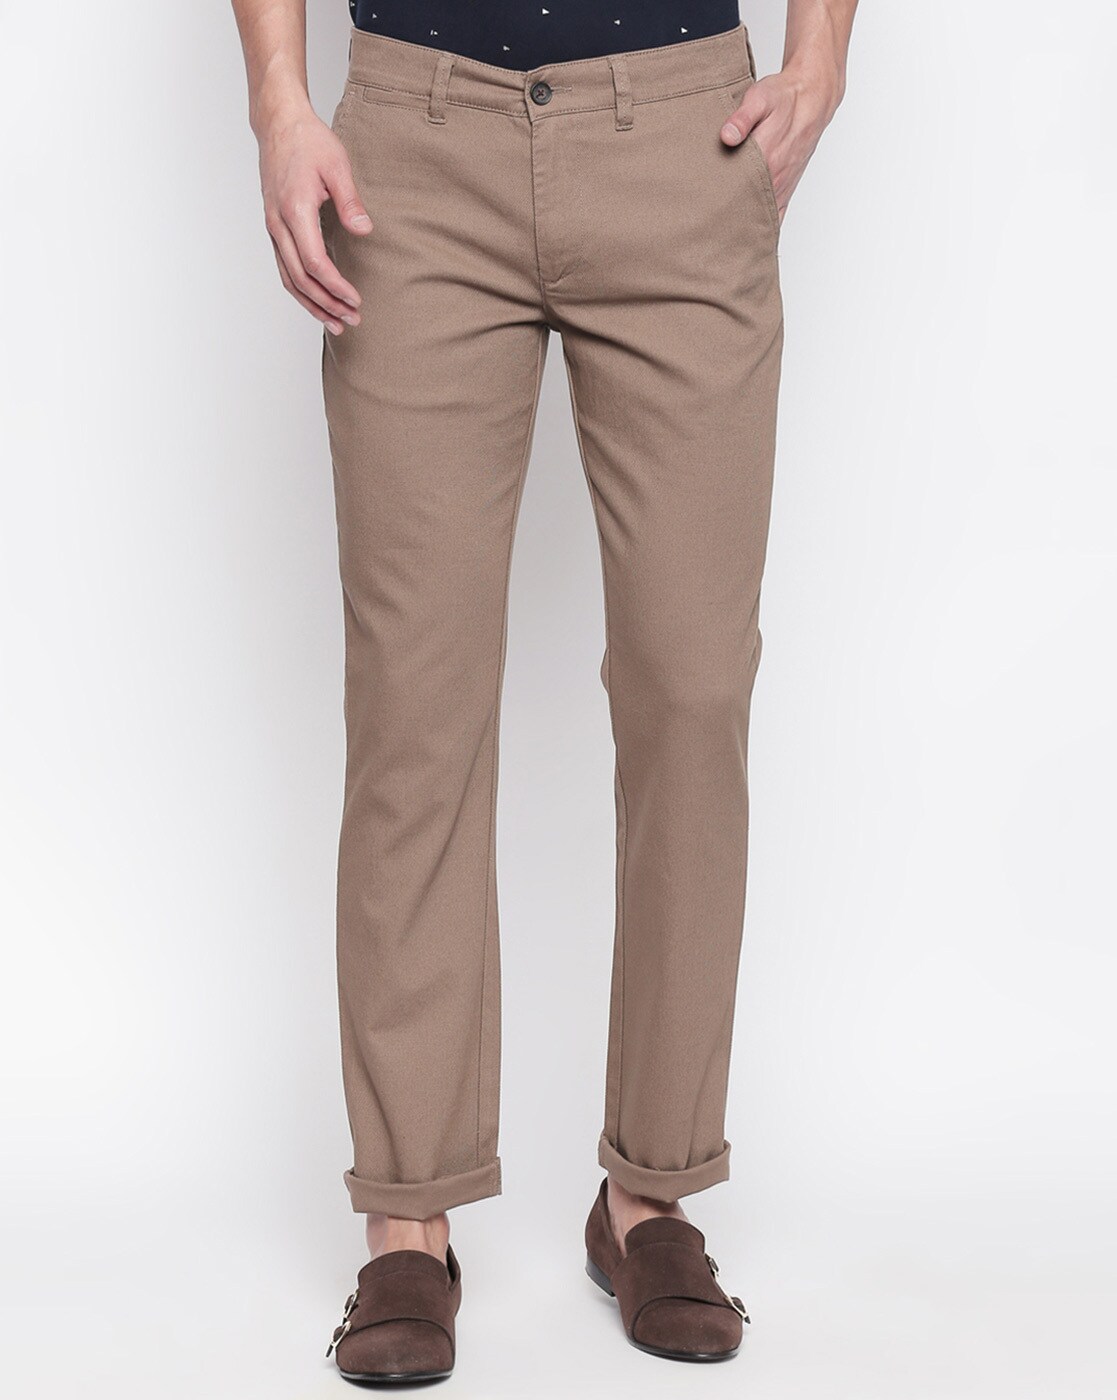 Buy Pantaloons Trousers online  Men  658 products  FASHIOLAin